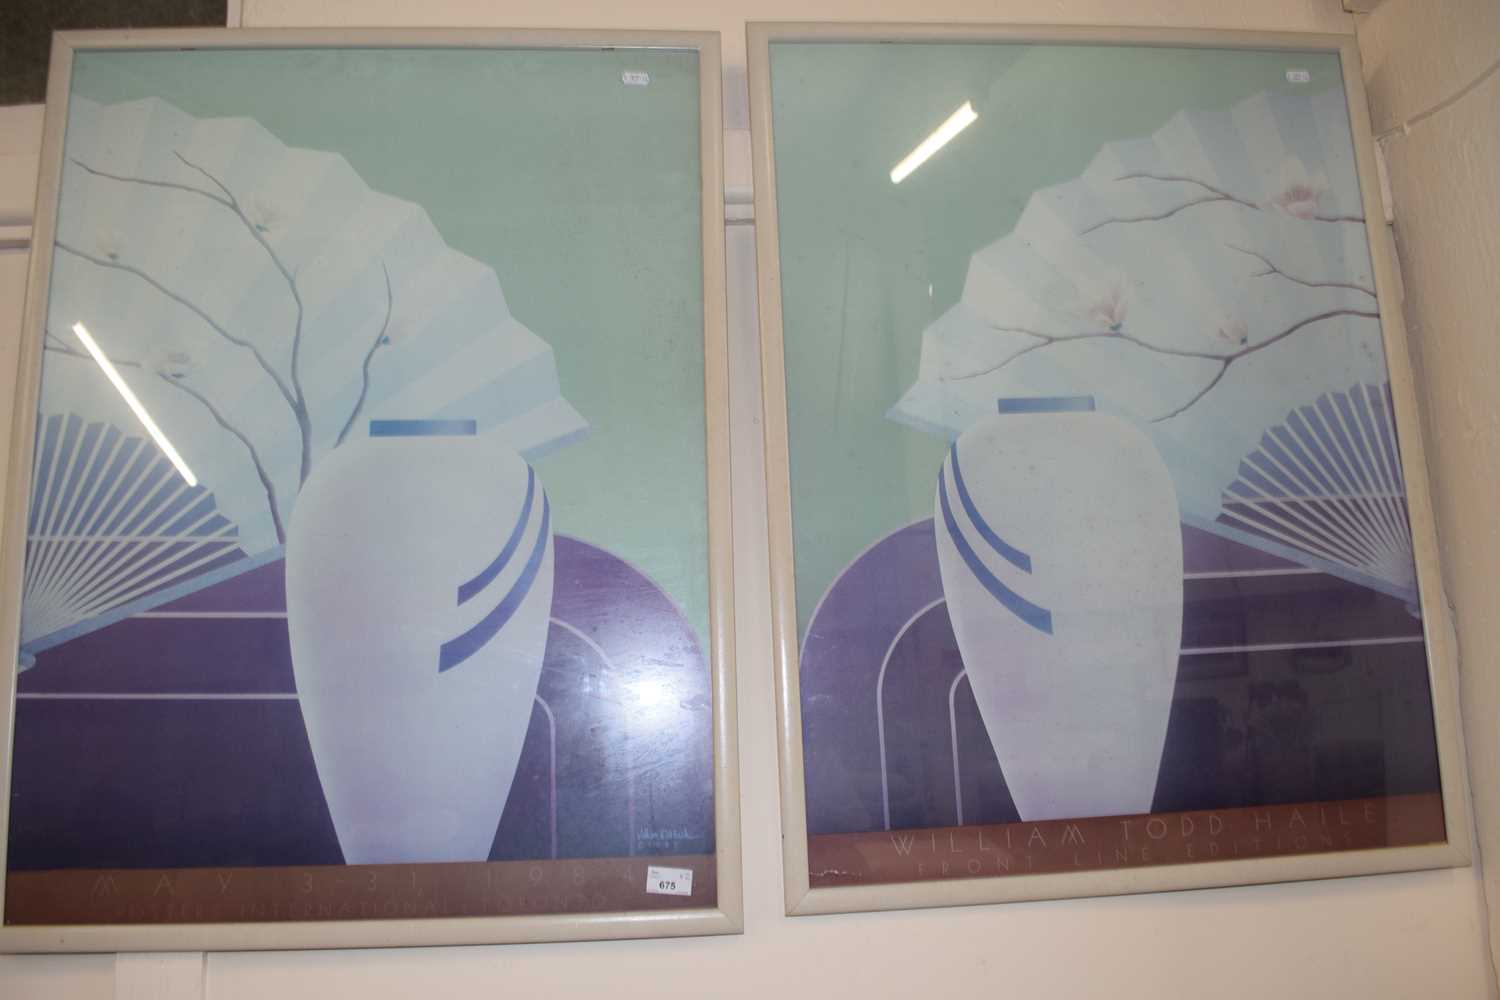 A pair of contemporary prints by William Todd Haile, front line editions, 1983, framed and glazed